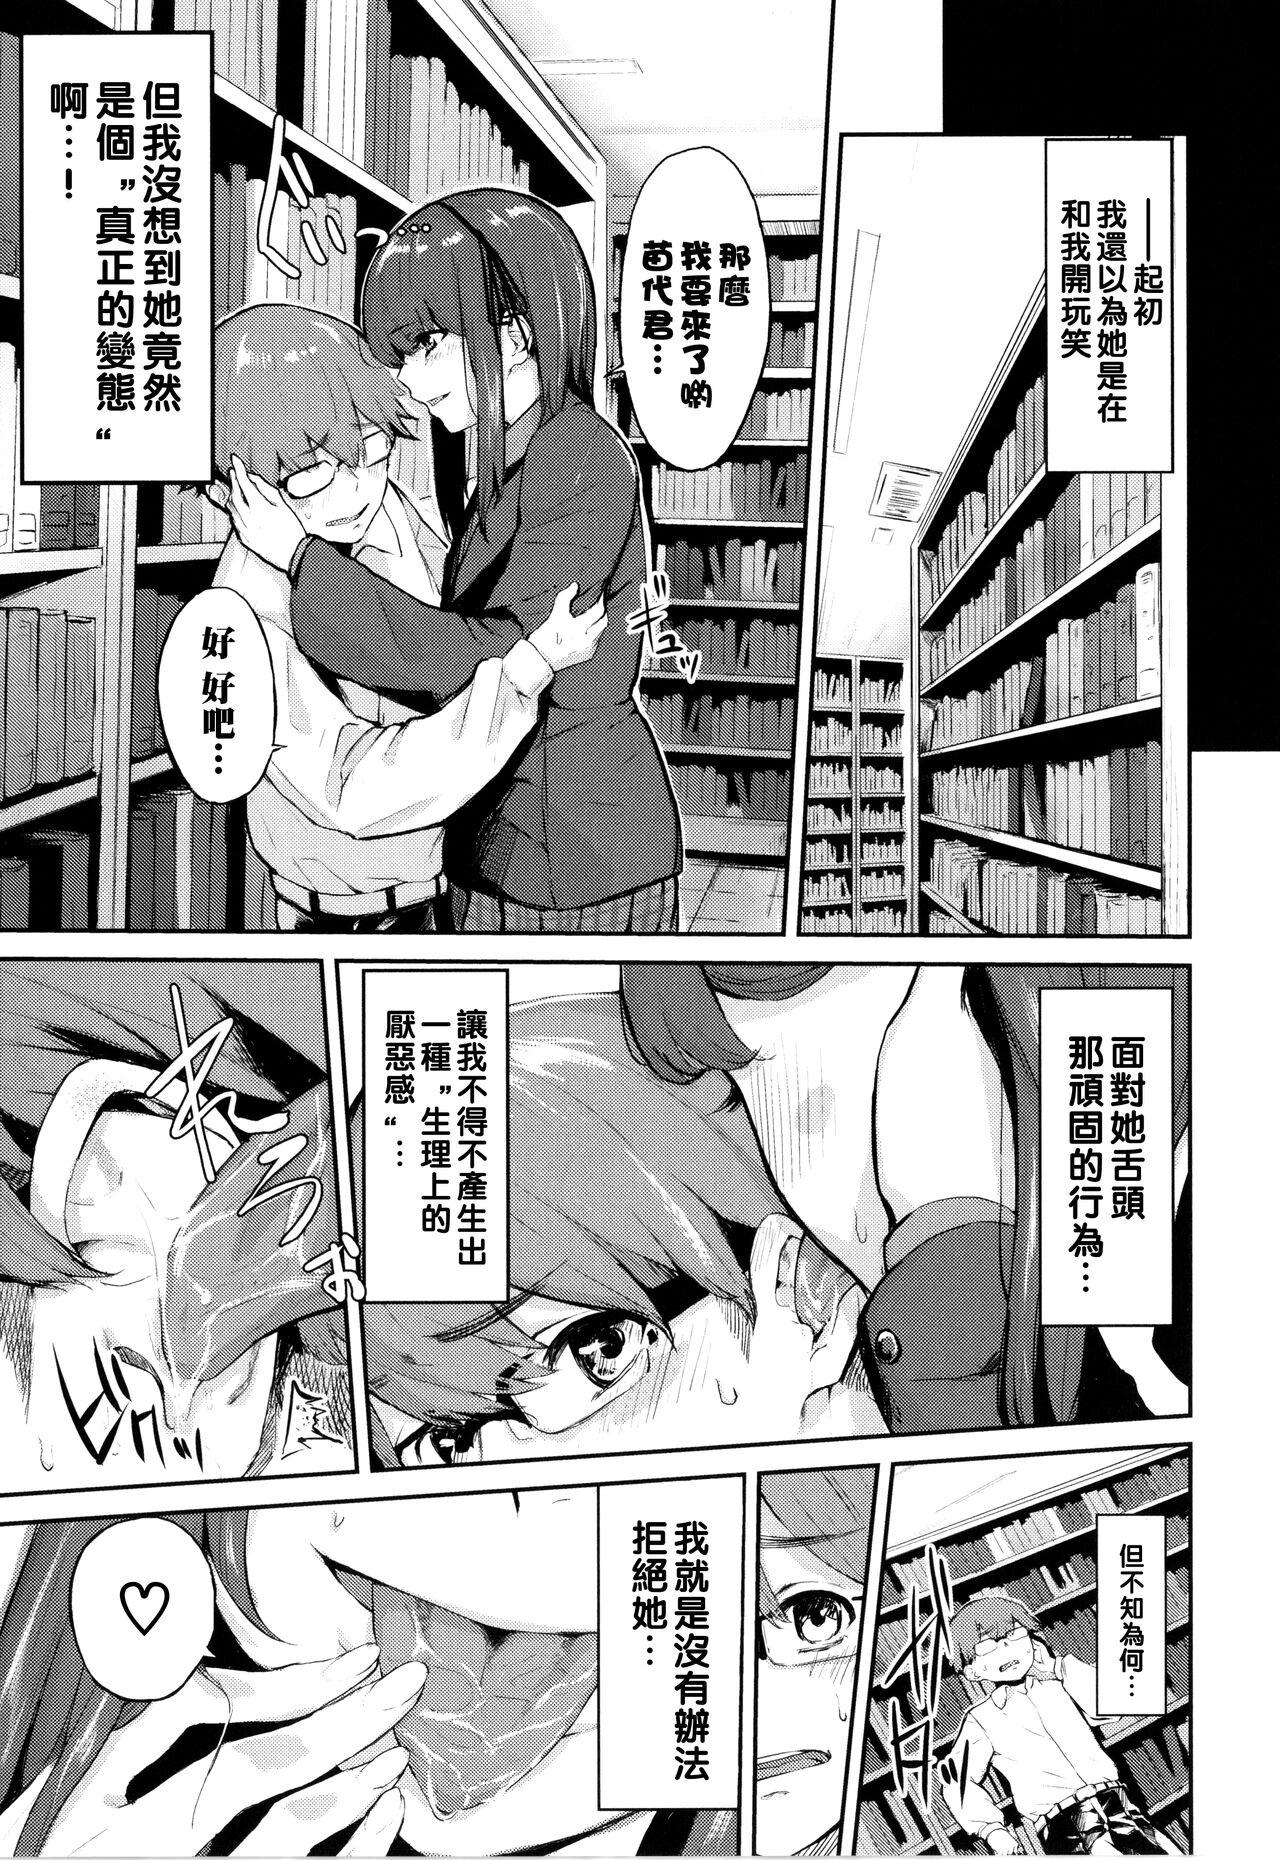 Amigo 図書室の秘密（Chinese） Best Blowjob - Page 3